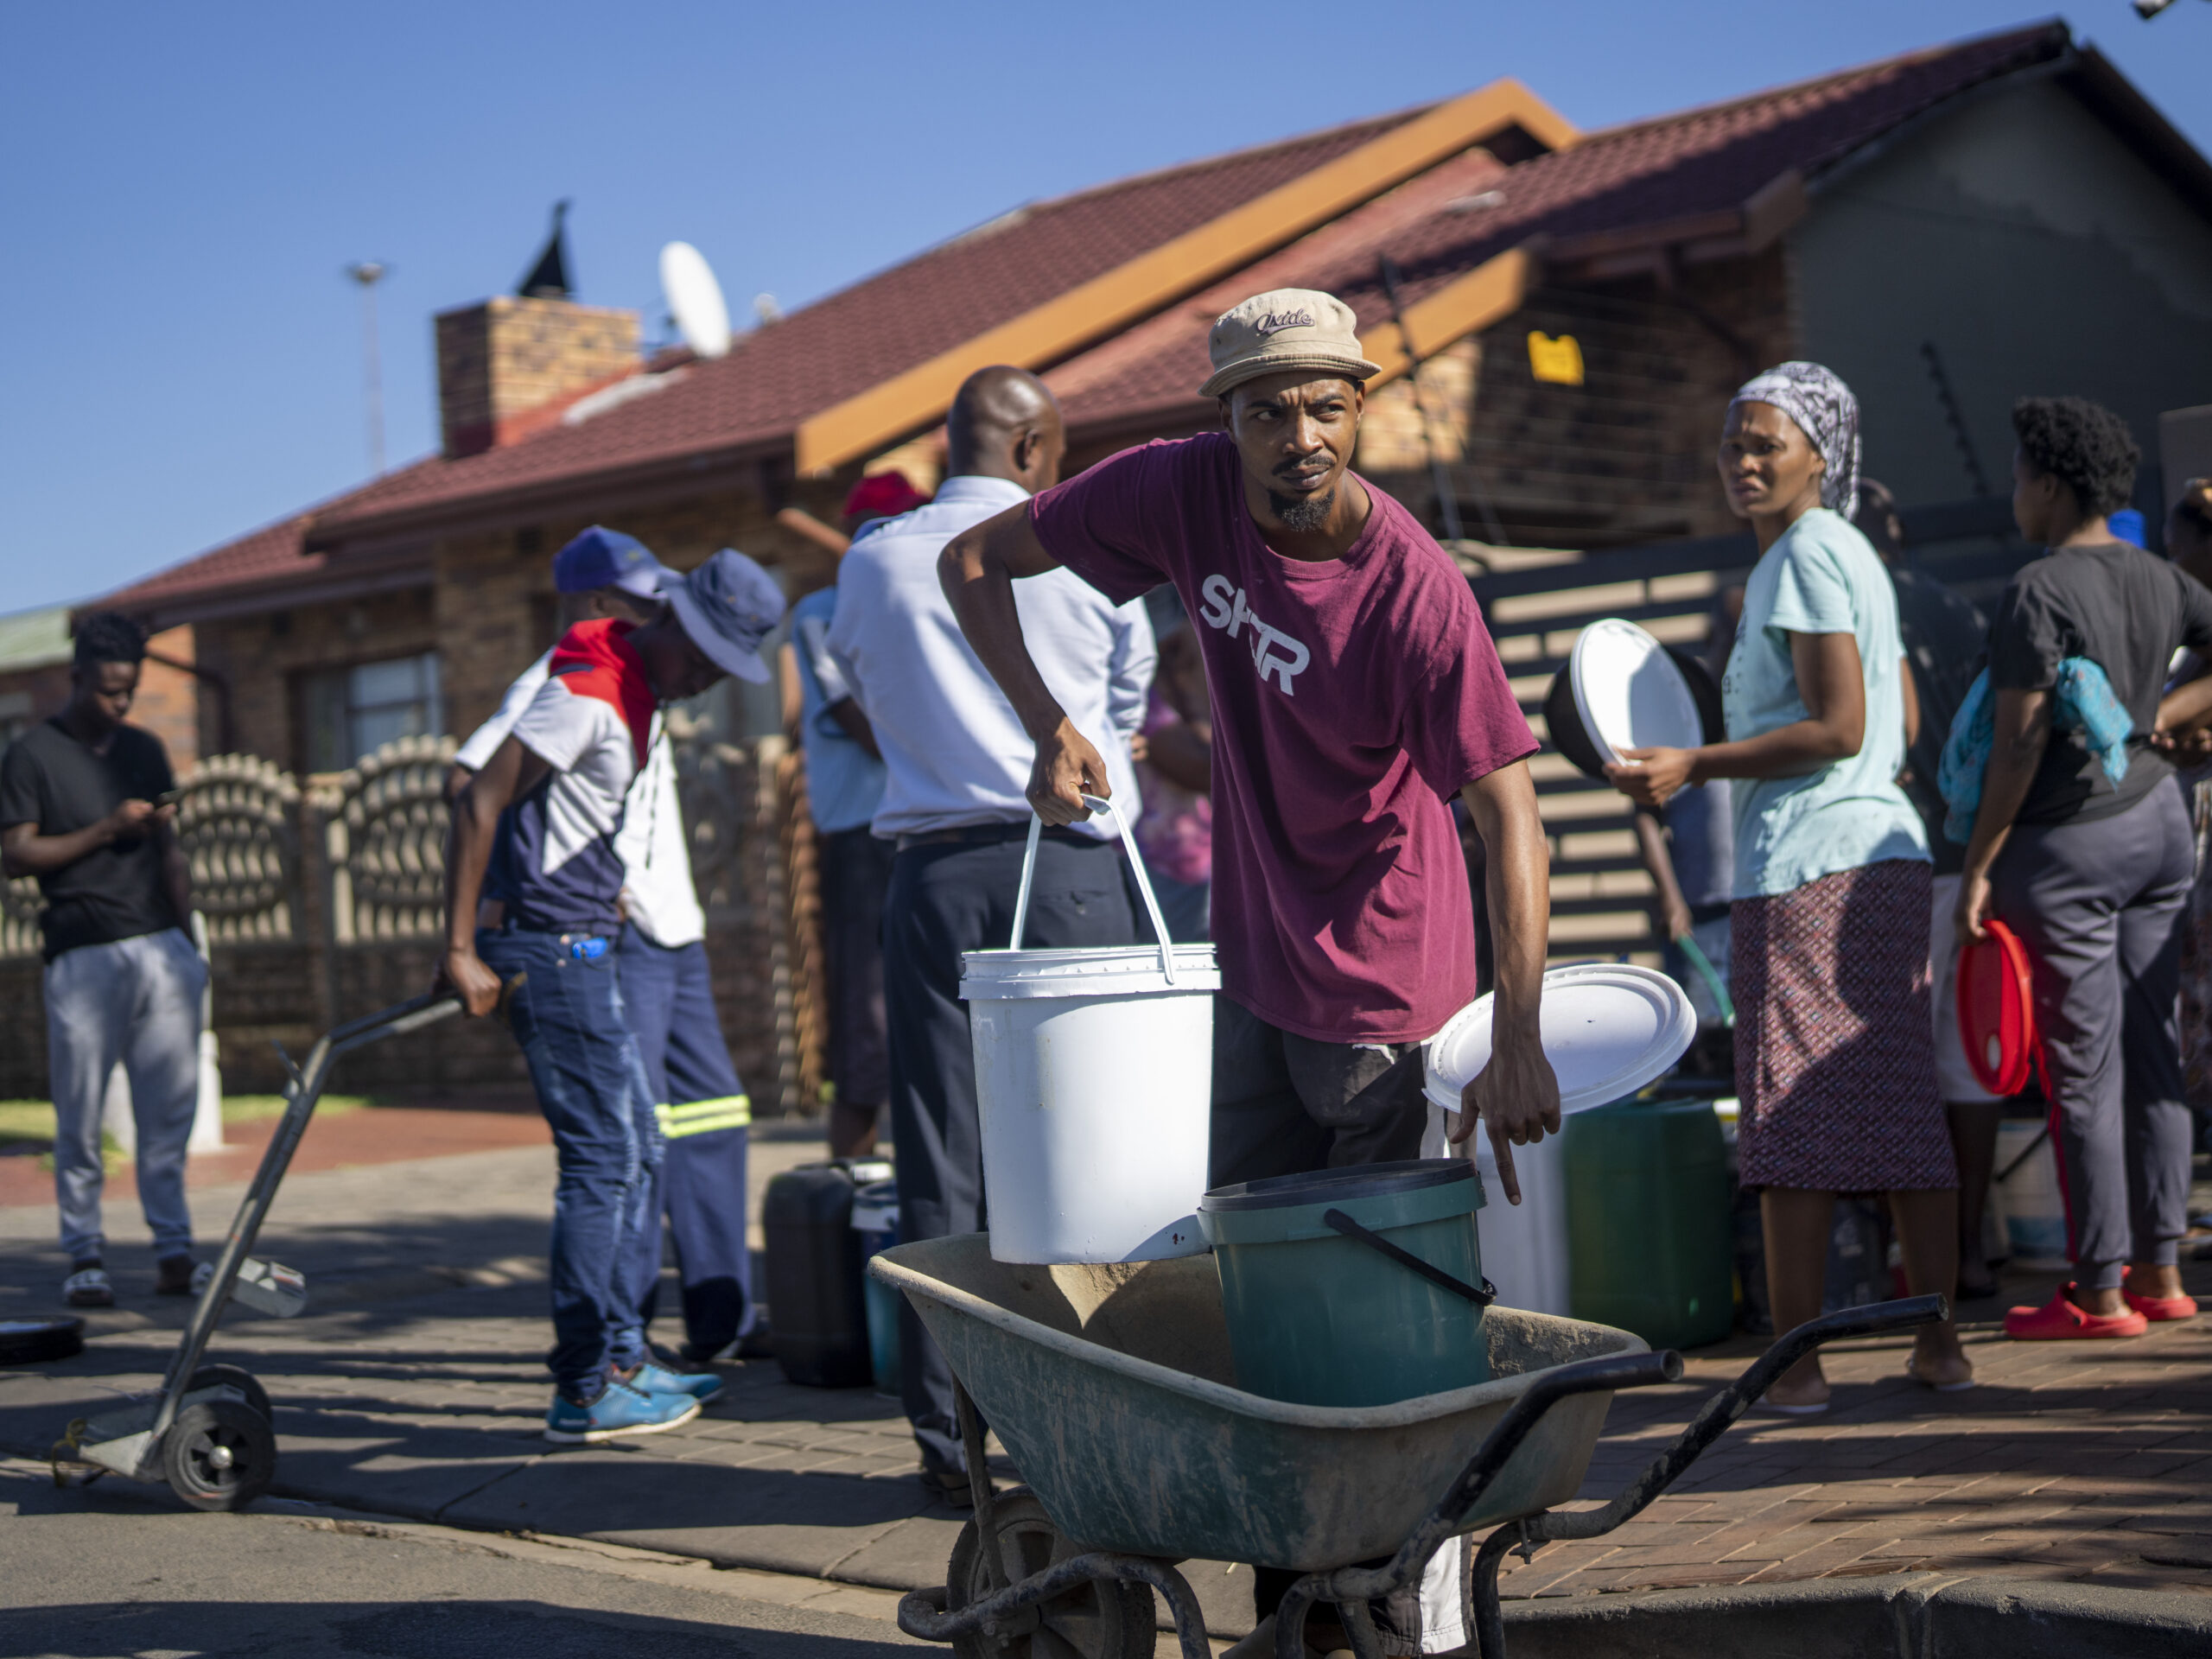 Johannesburg’s water crisis is the latest blow to South Africa’s ‘world-class city’